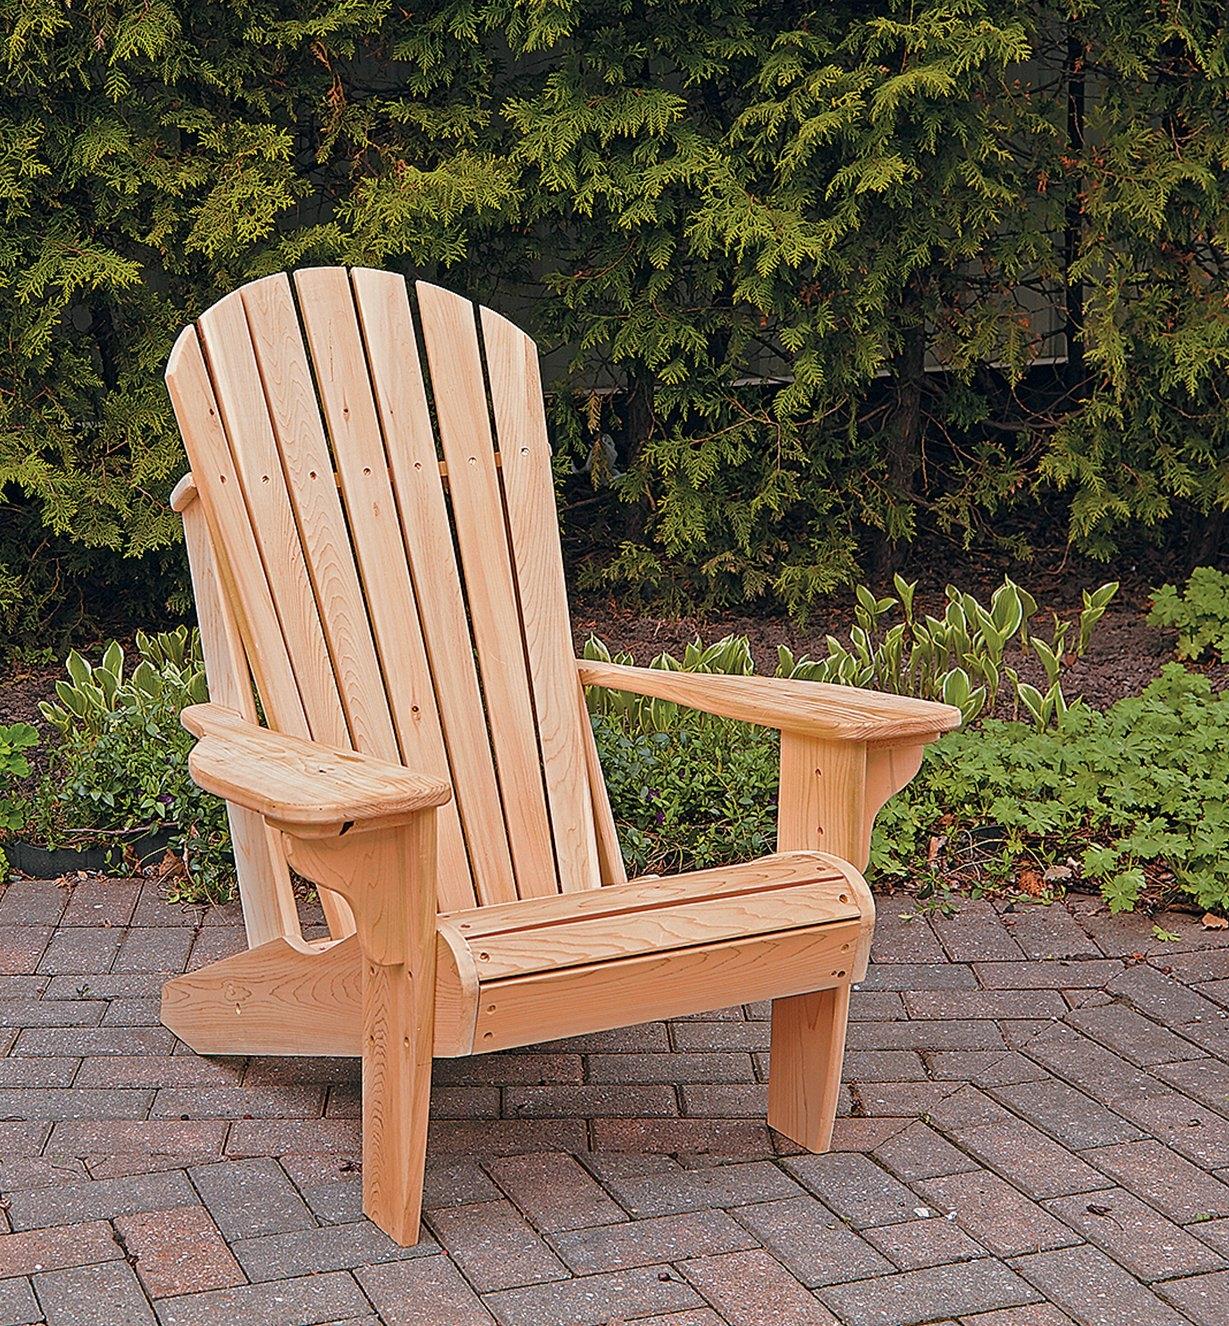 Example of completed Adirondack chair